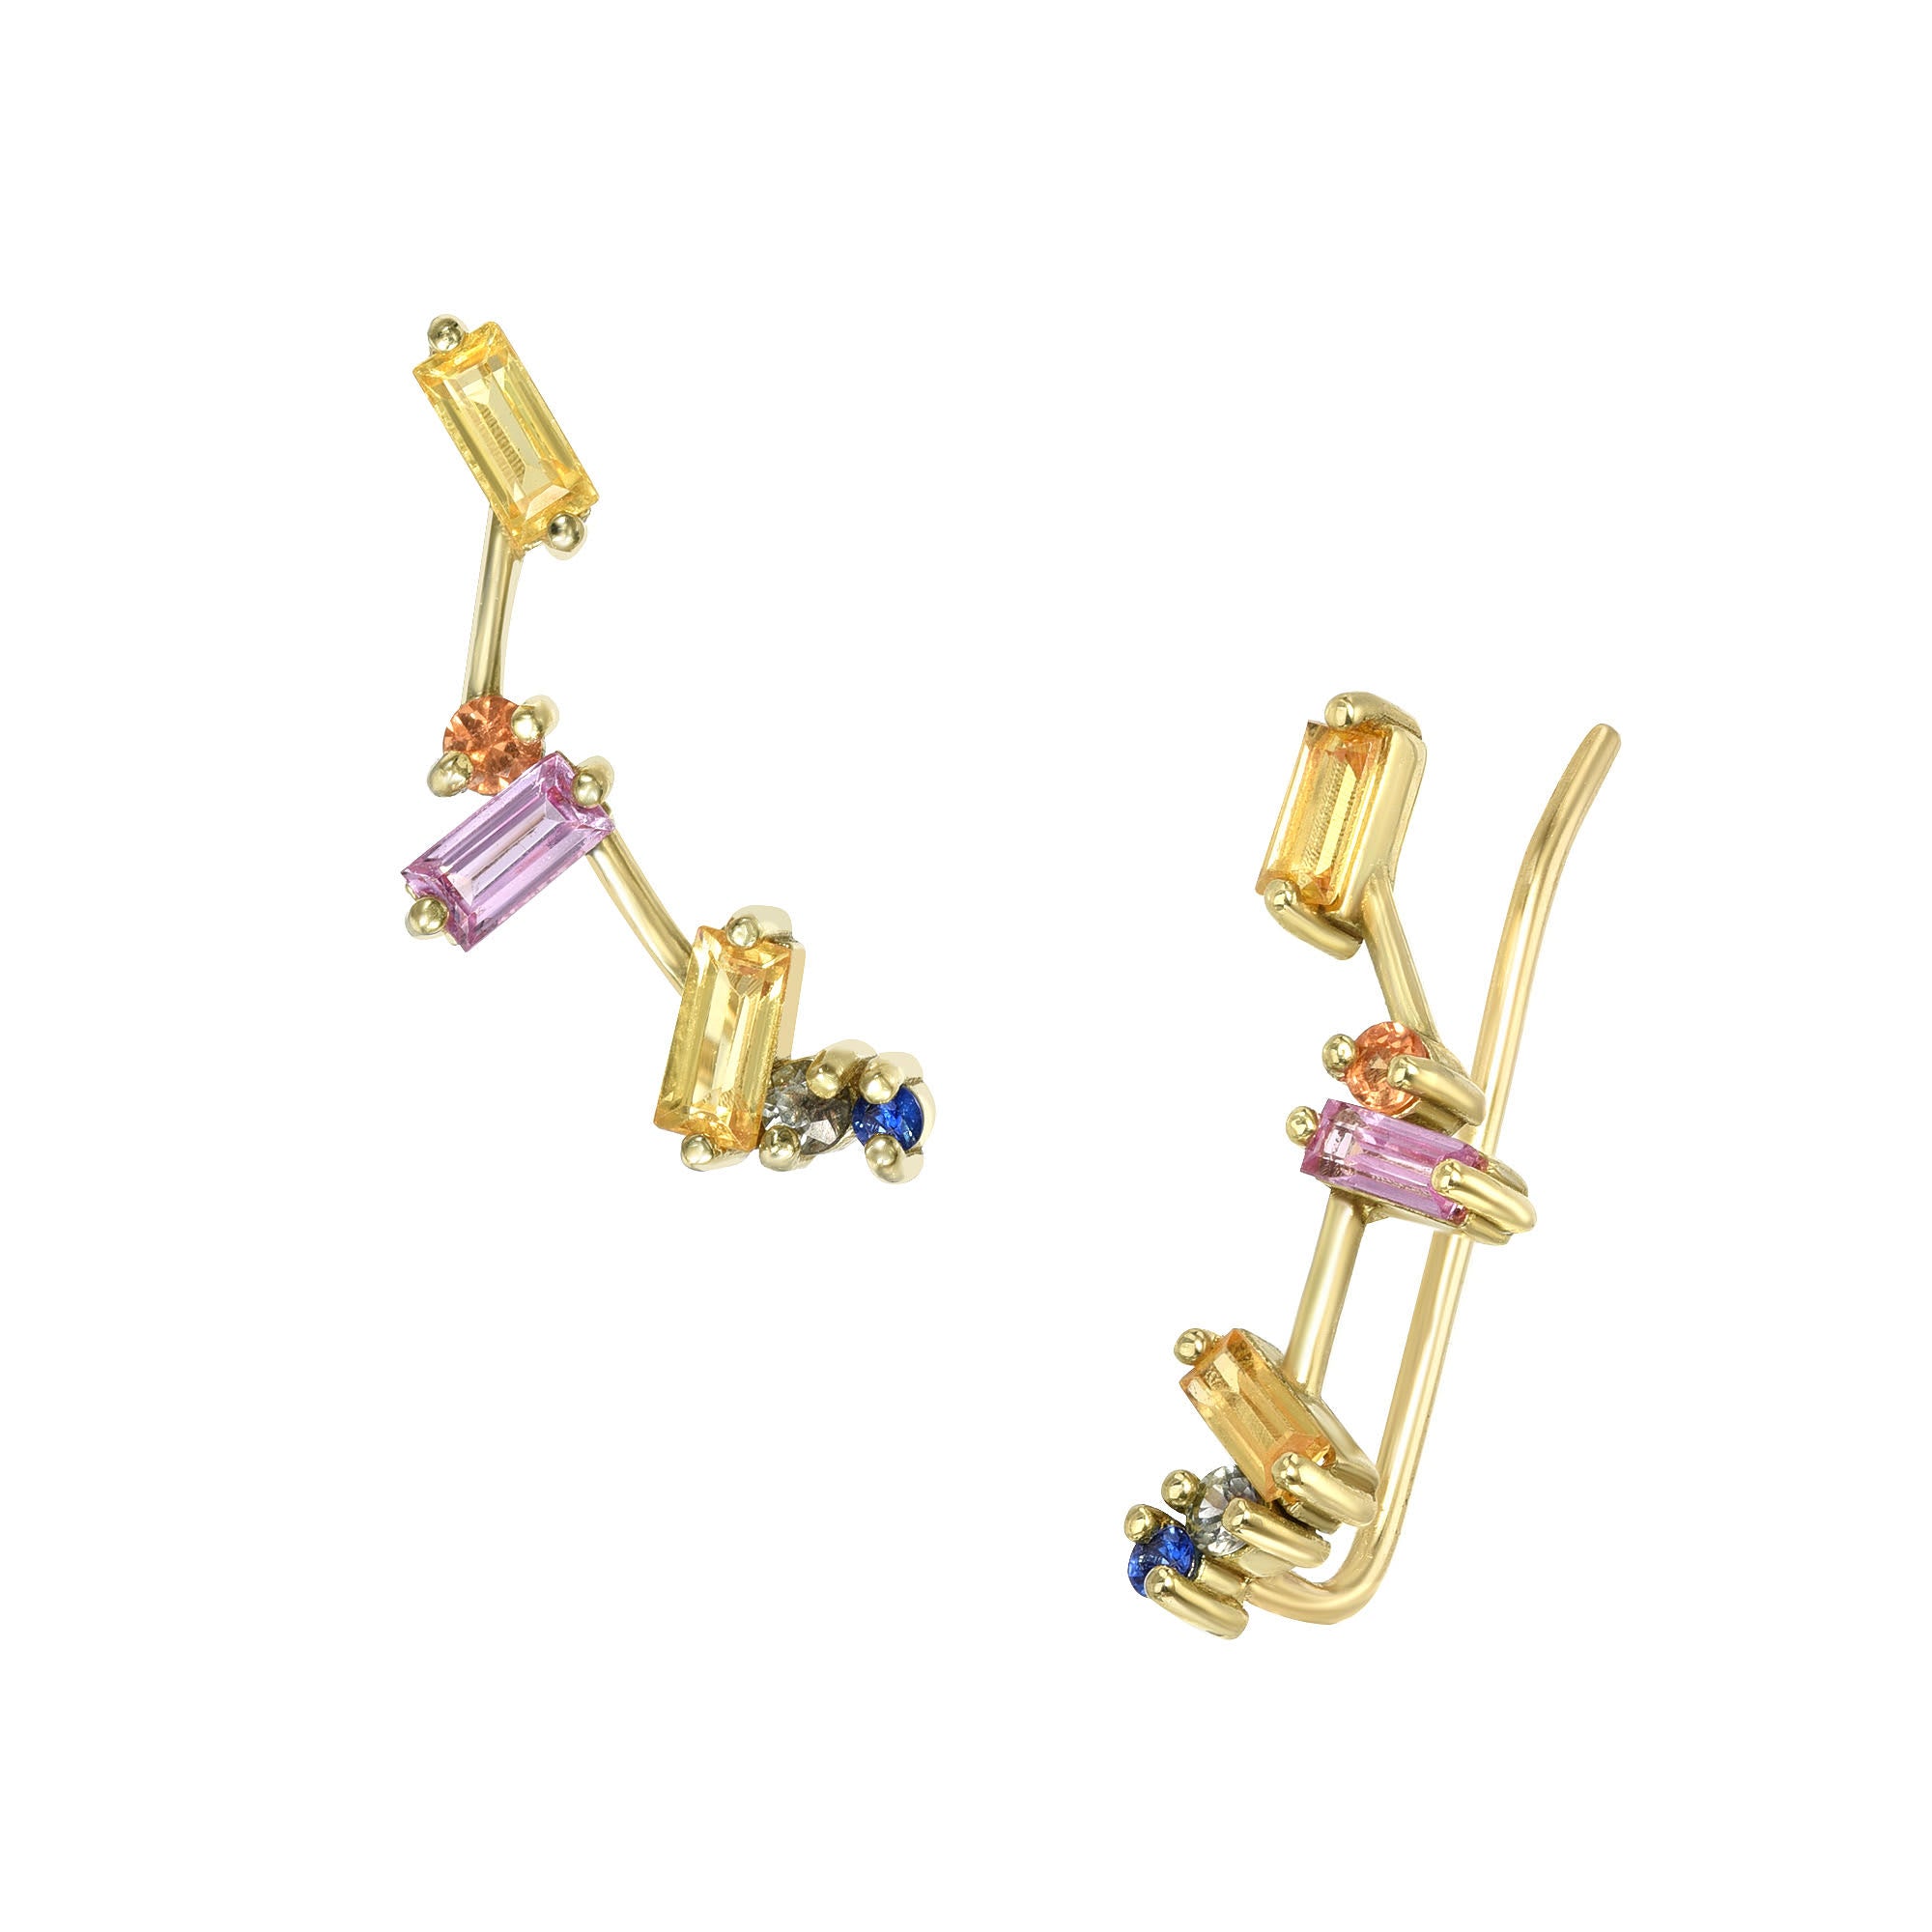 Fancy Colored Sapphire Climber Earrings by Meredith Young